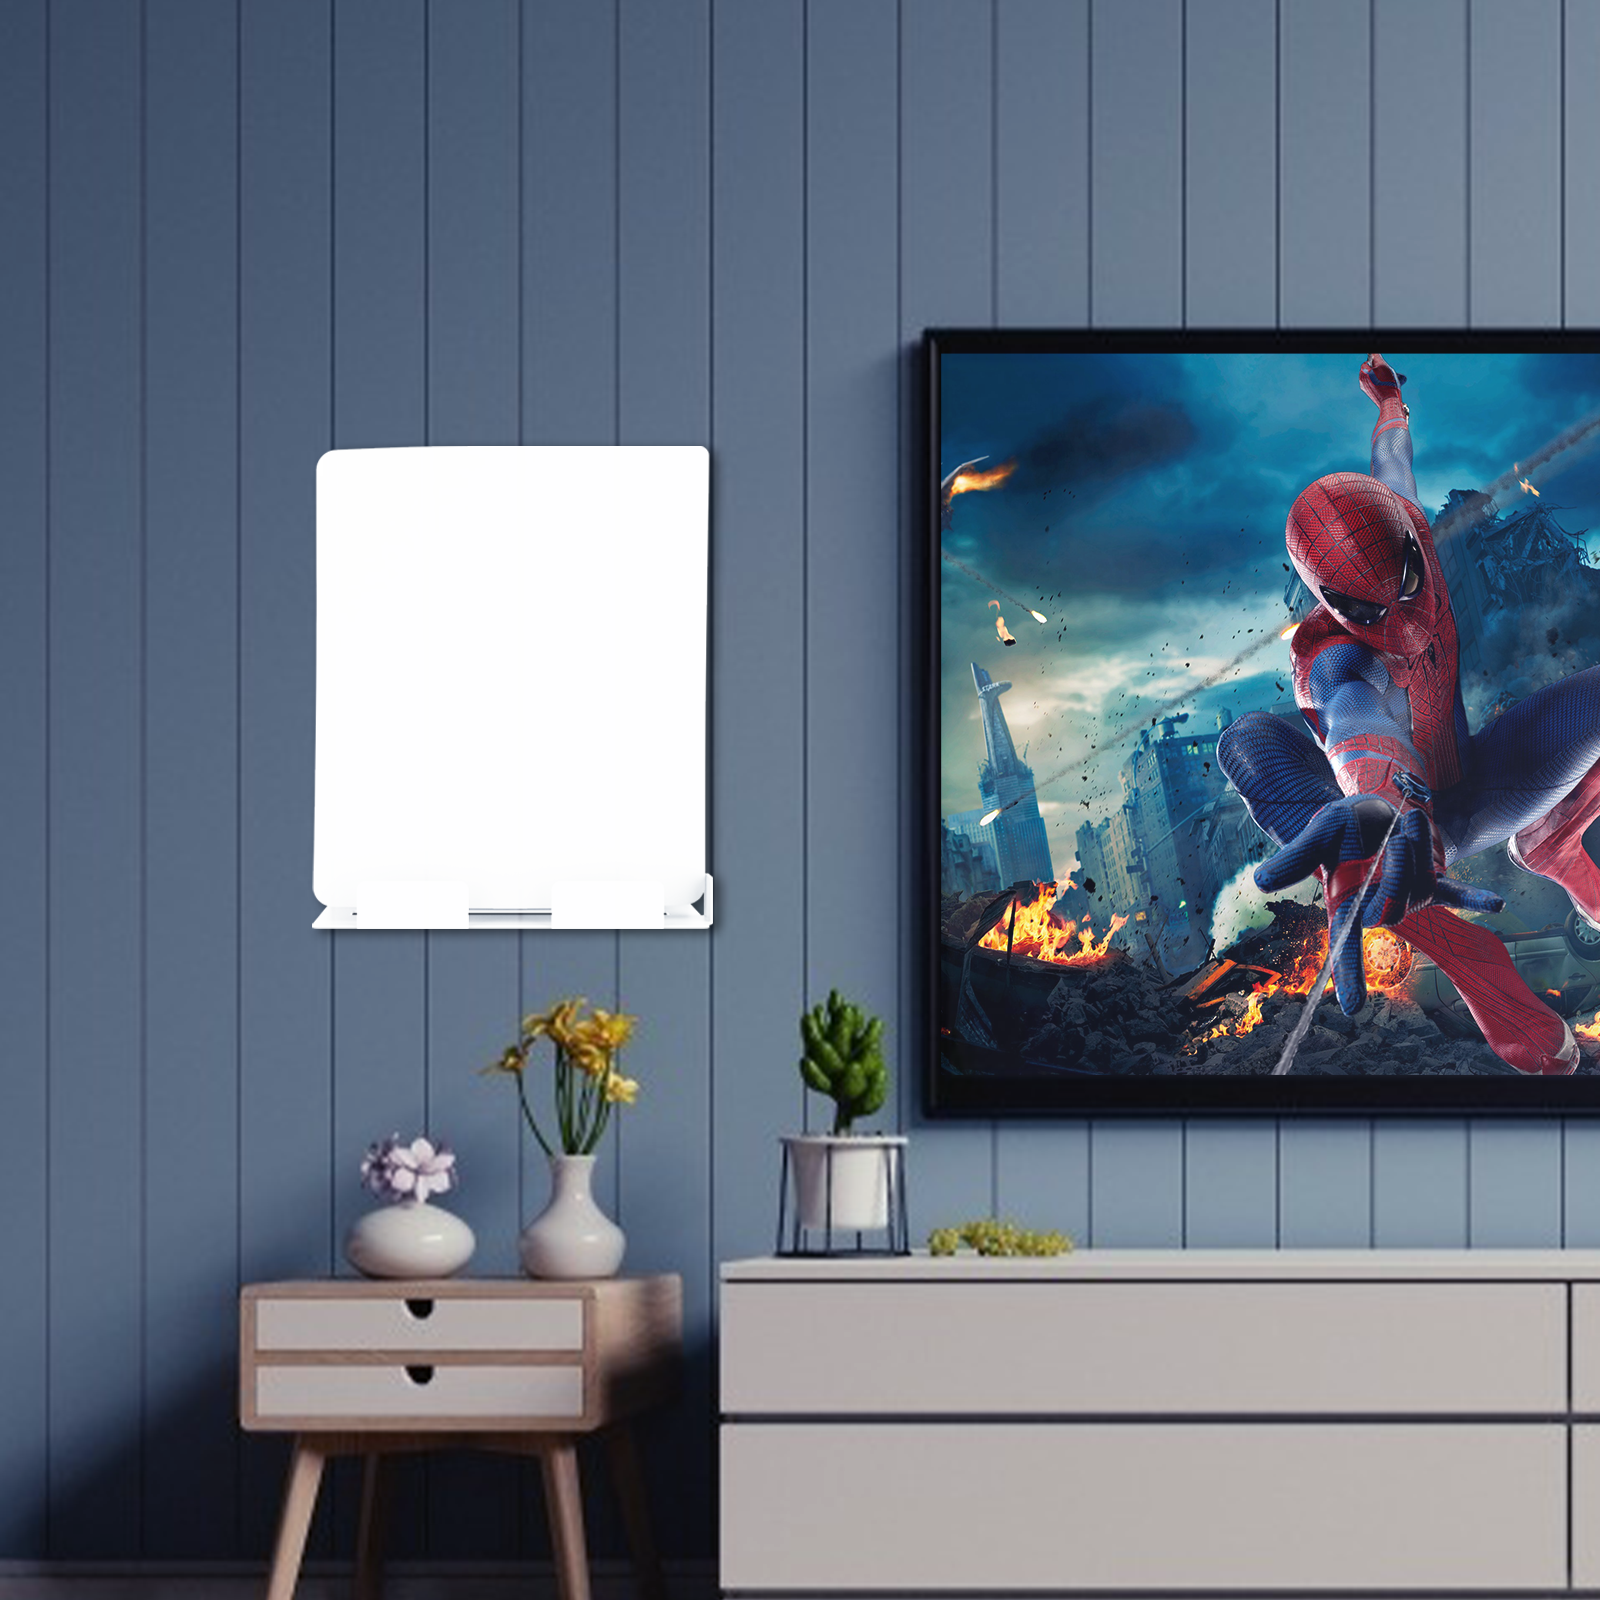 In a living room, a TV mounted on the wall, with a PS5 wall mount on the left side.